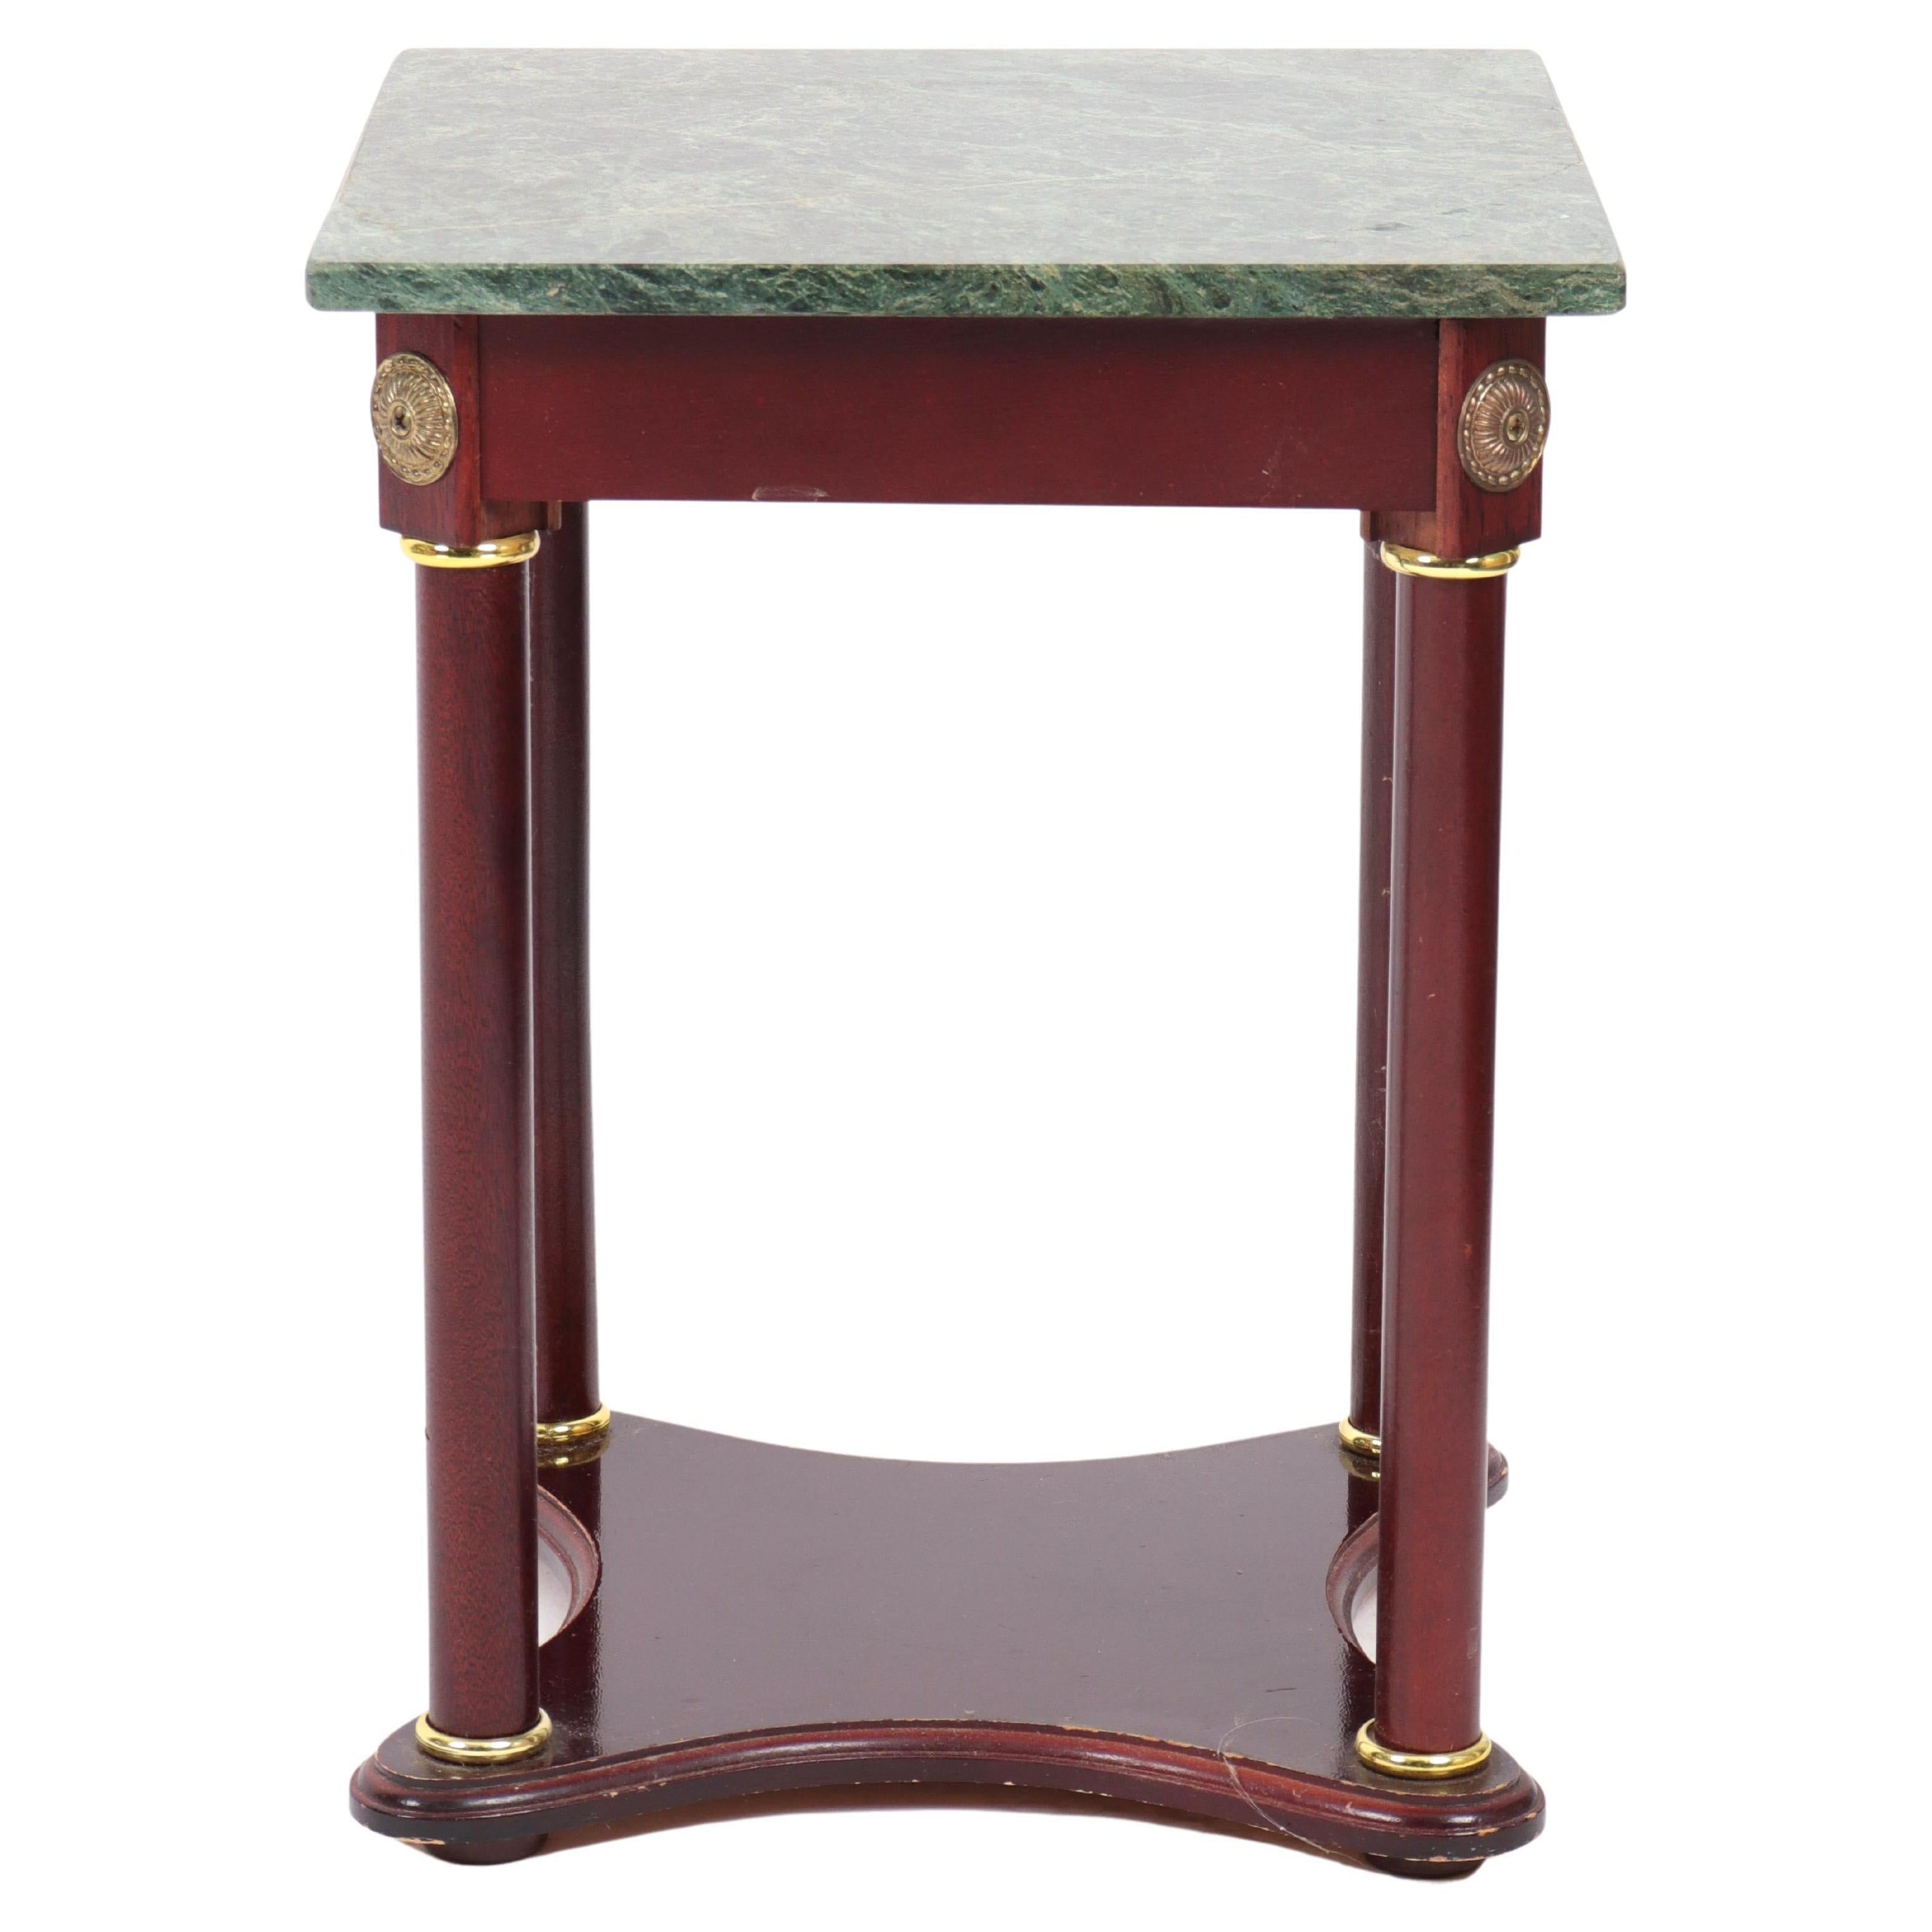 French Empire manner miniature stone top side table with columnar supports. 

Dealer: S138XX